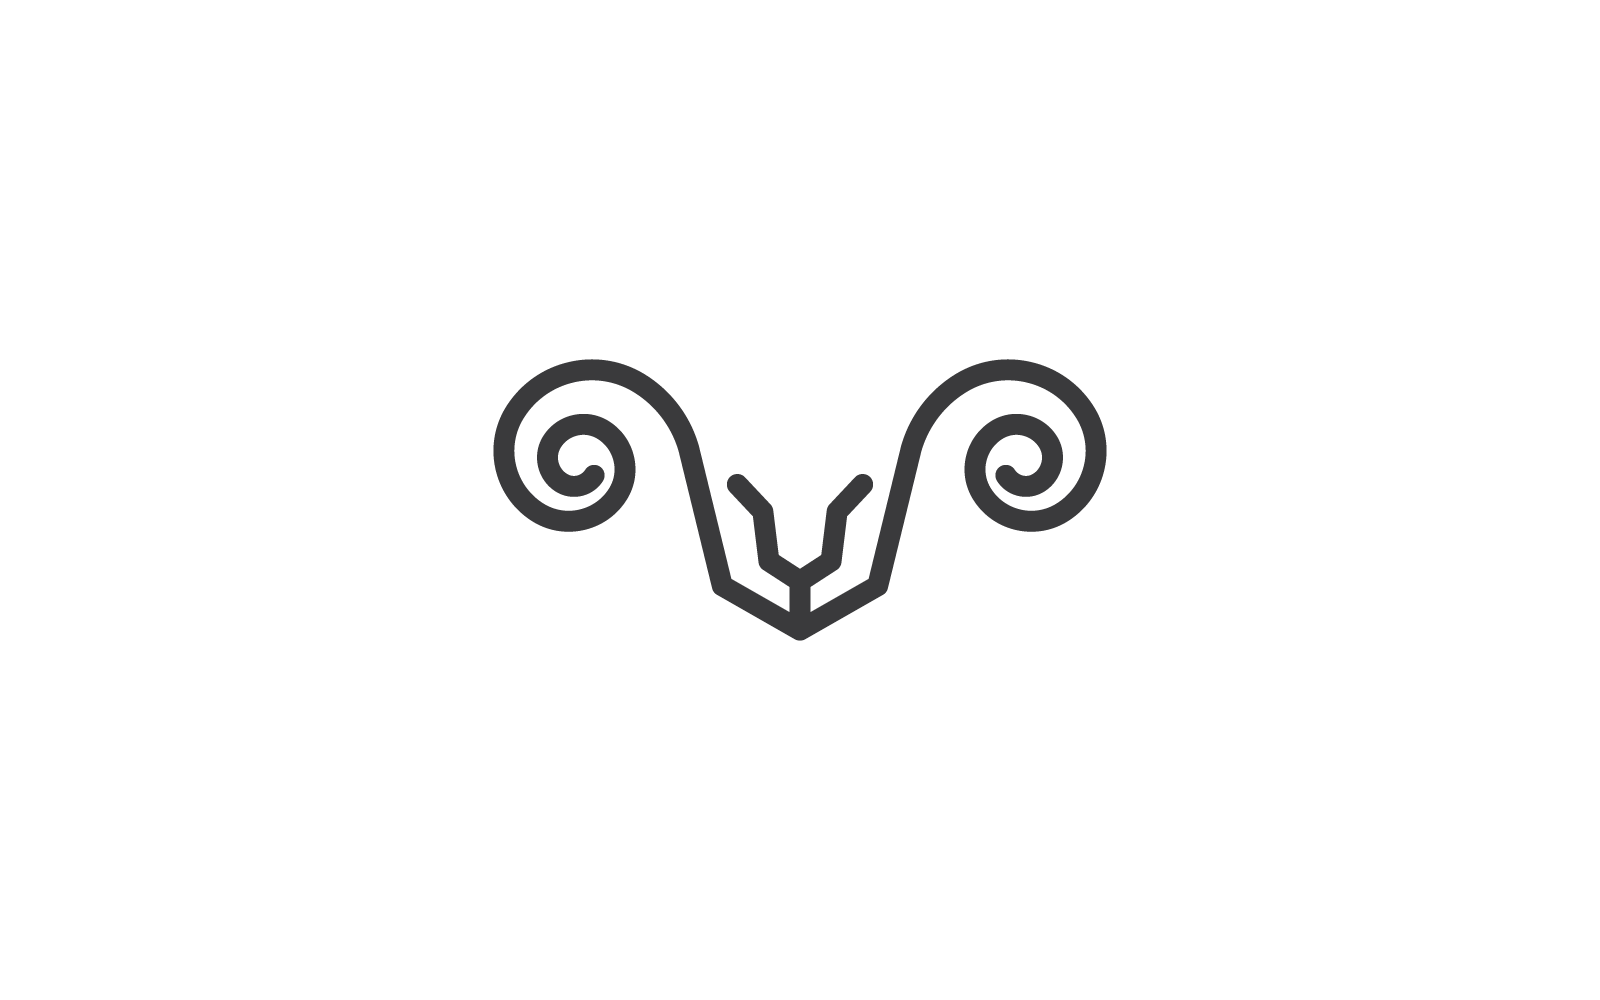 Goat and sheep illustration logo template vector Logo Template